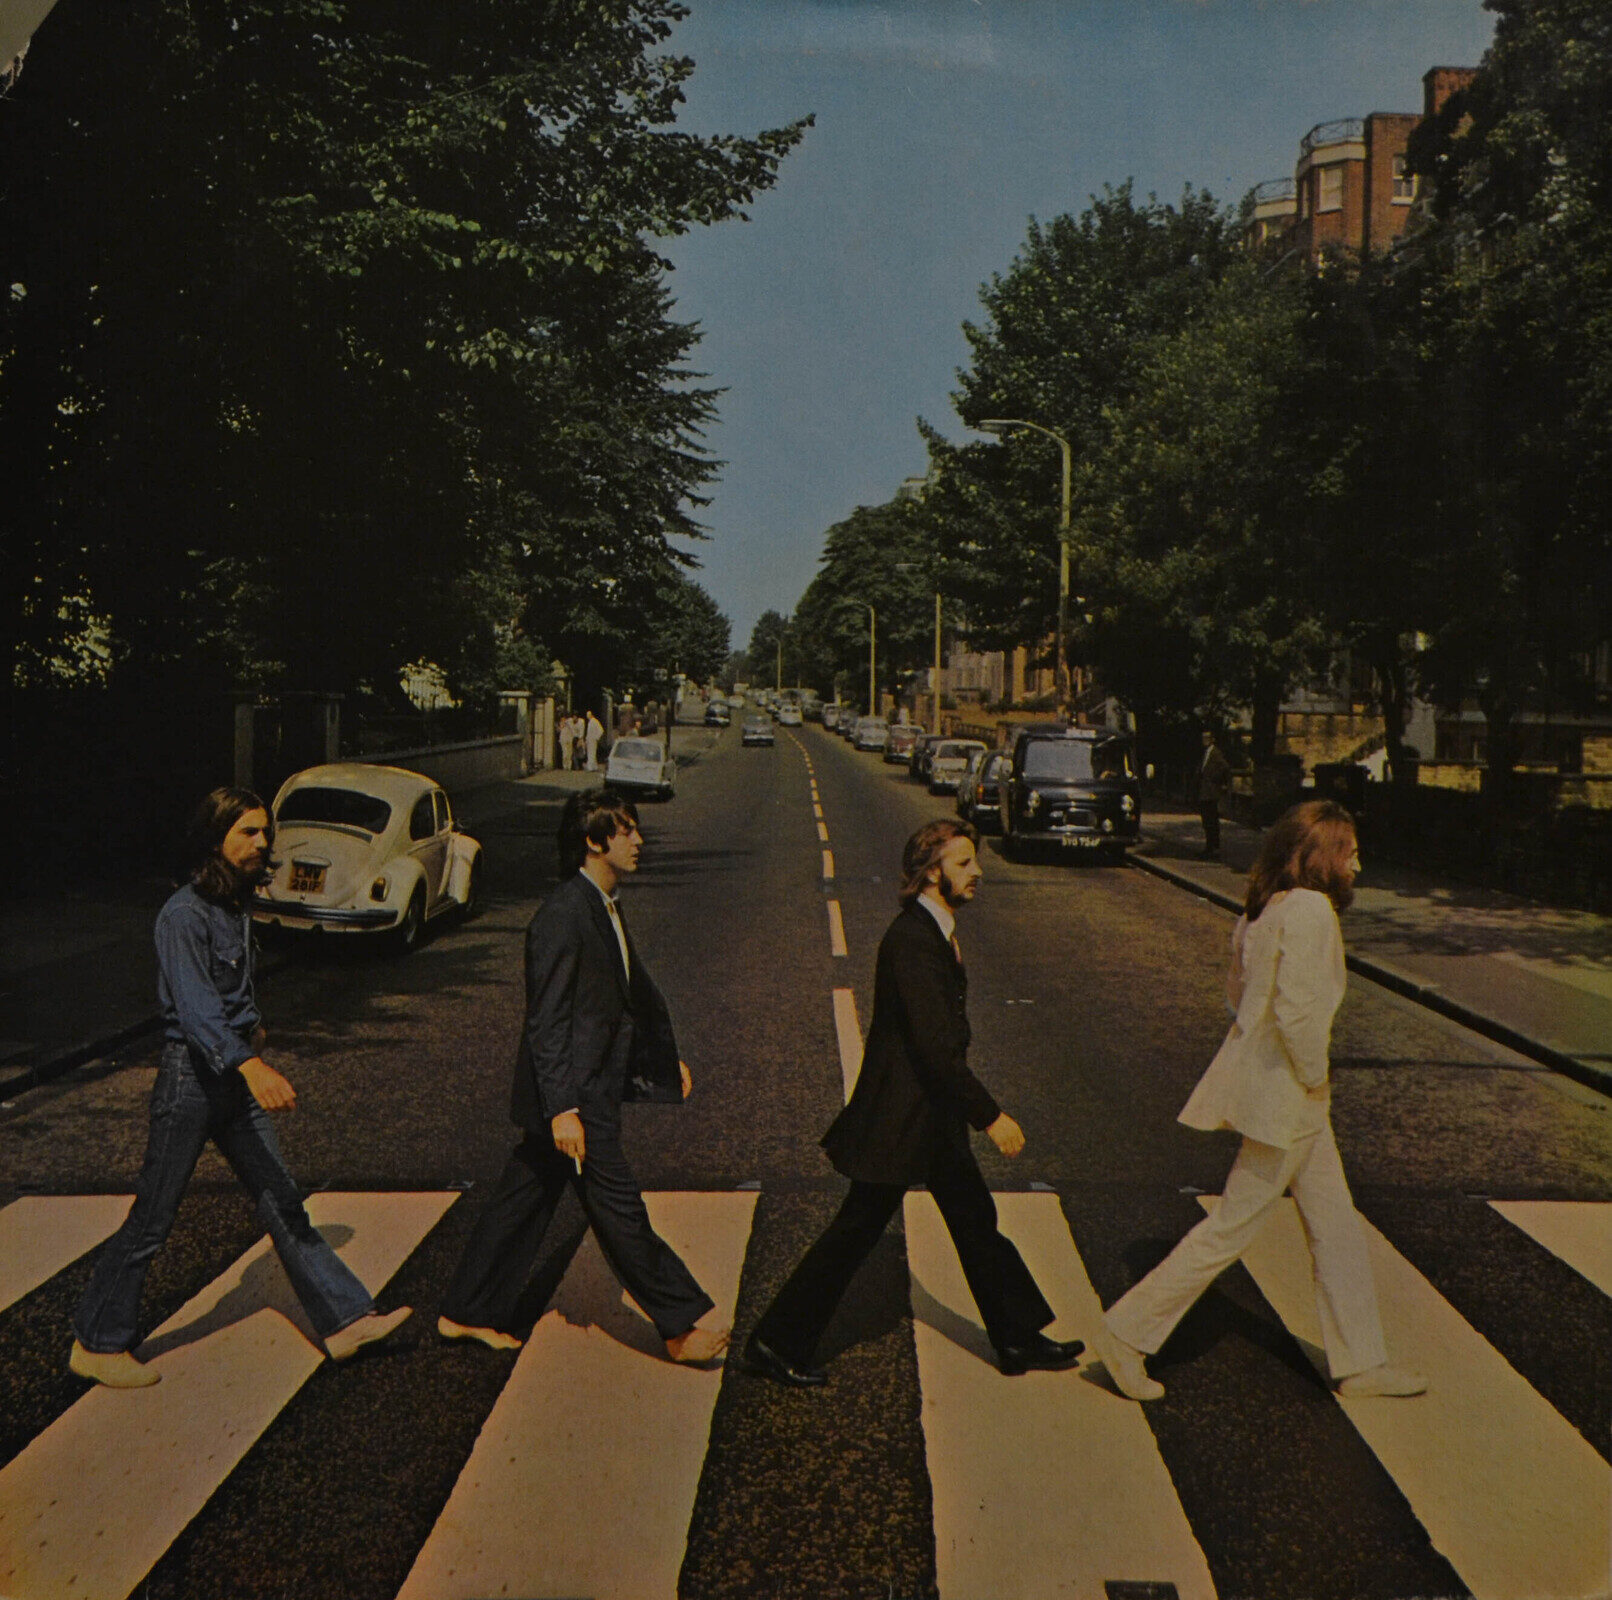 The Beatles "Abbey Road"